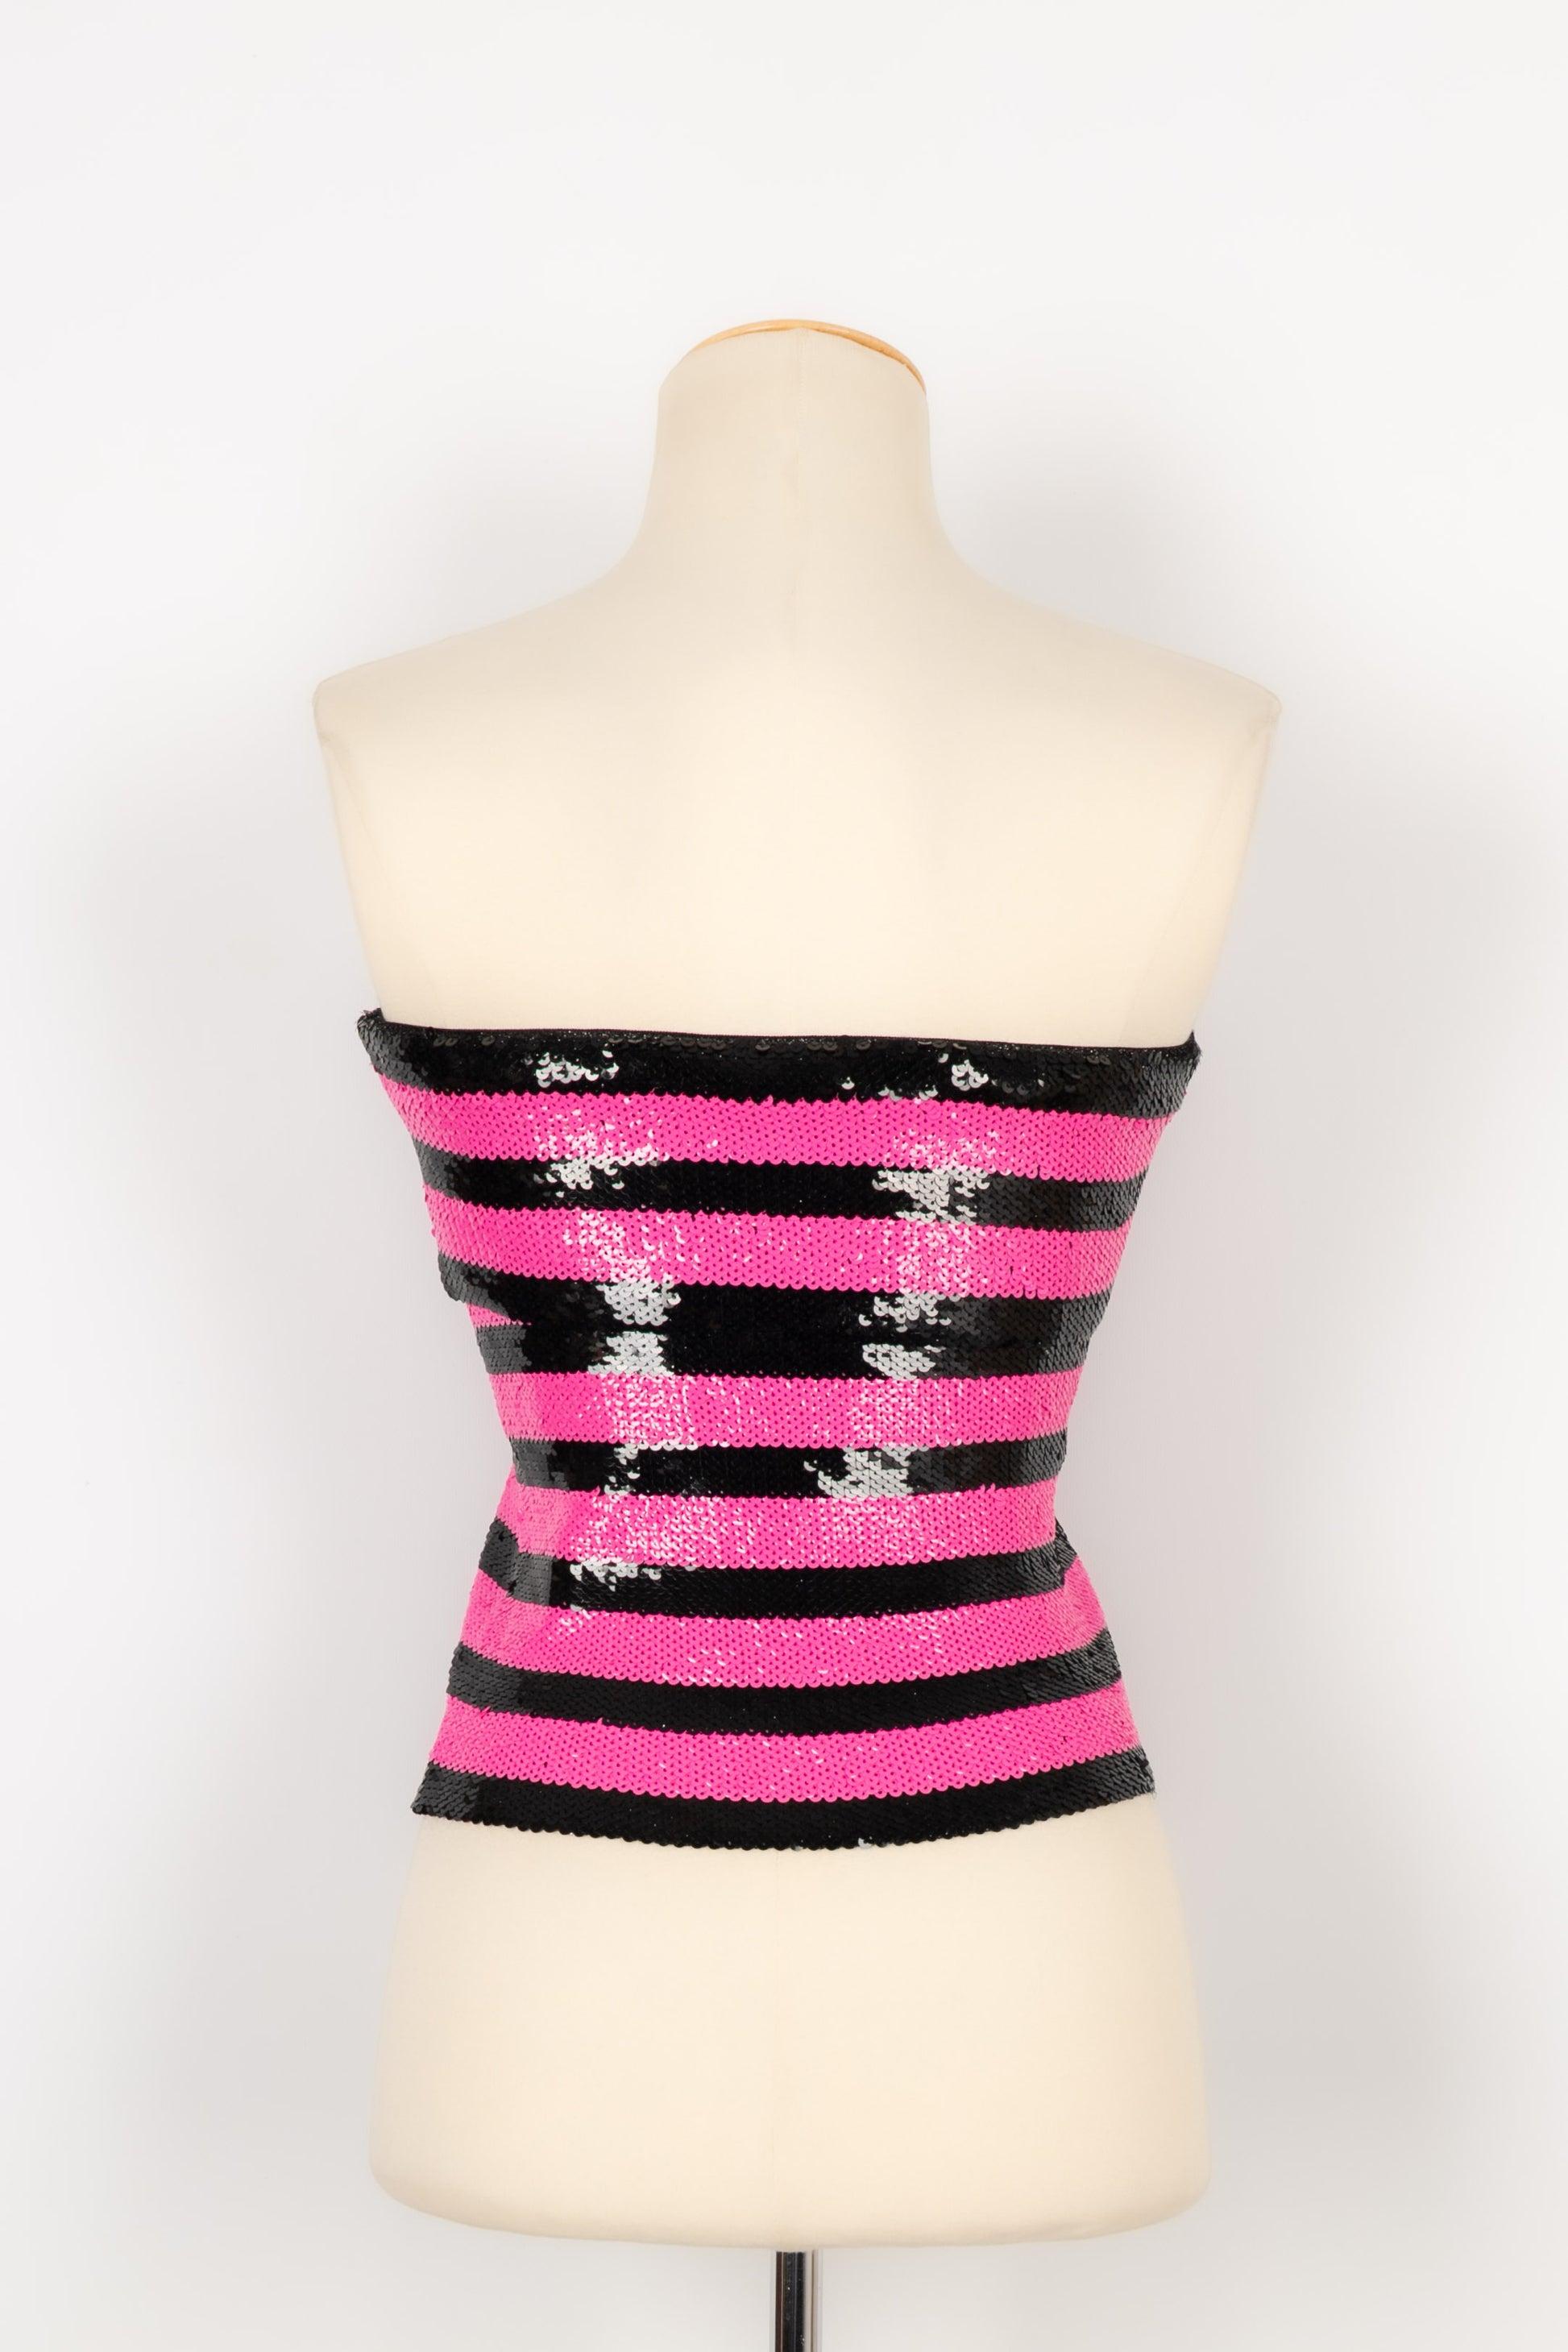 Beige Yves Saint Laurent Black and Pink Sequinned Bustier Top, 2013 For Sale